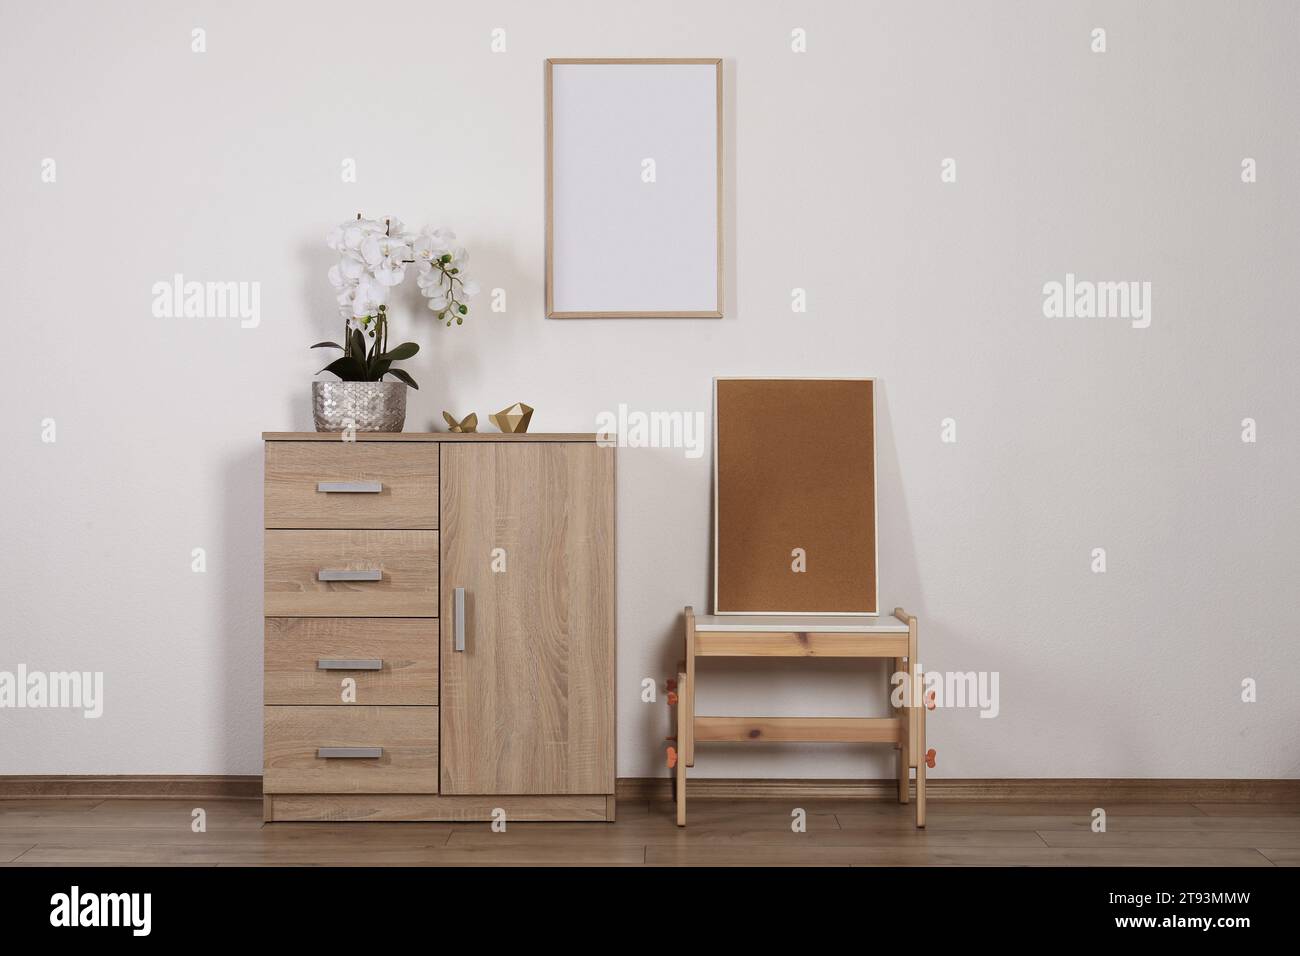 Chest of drawers, table, orchid and picture frames indoors. Interior design Stock Photo